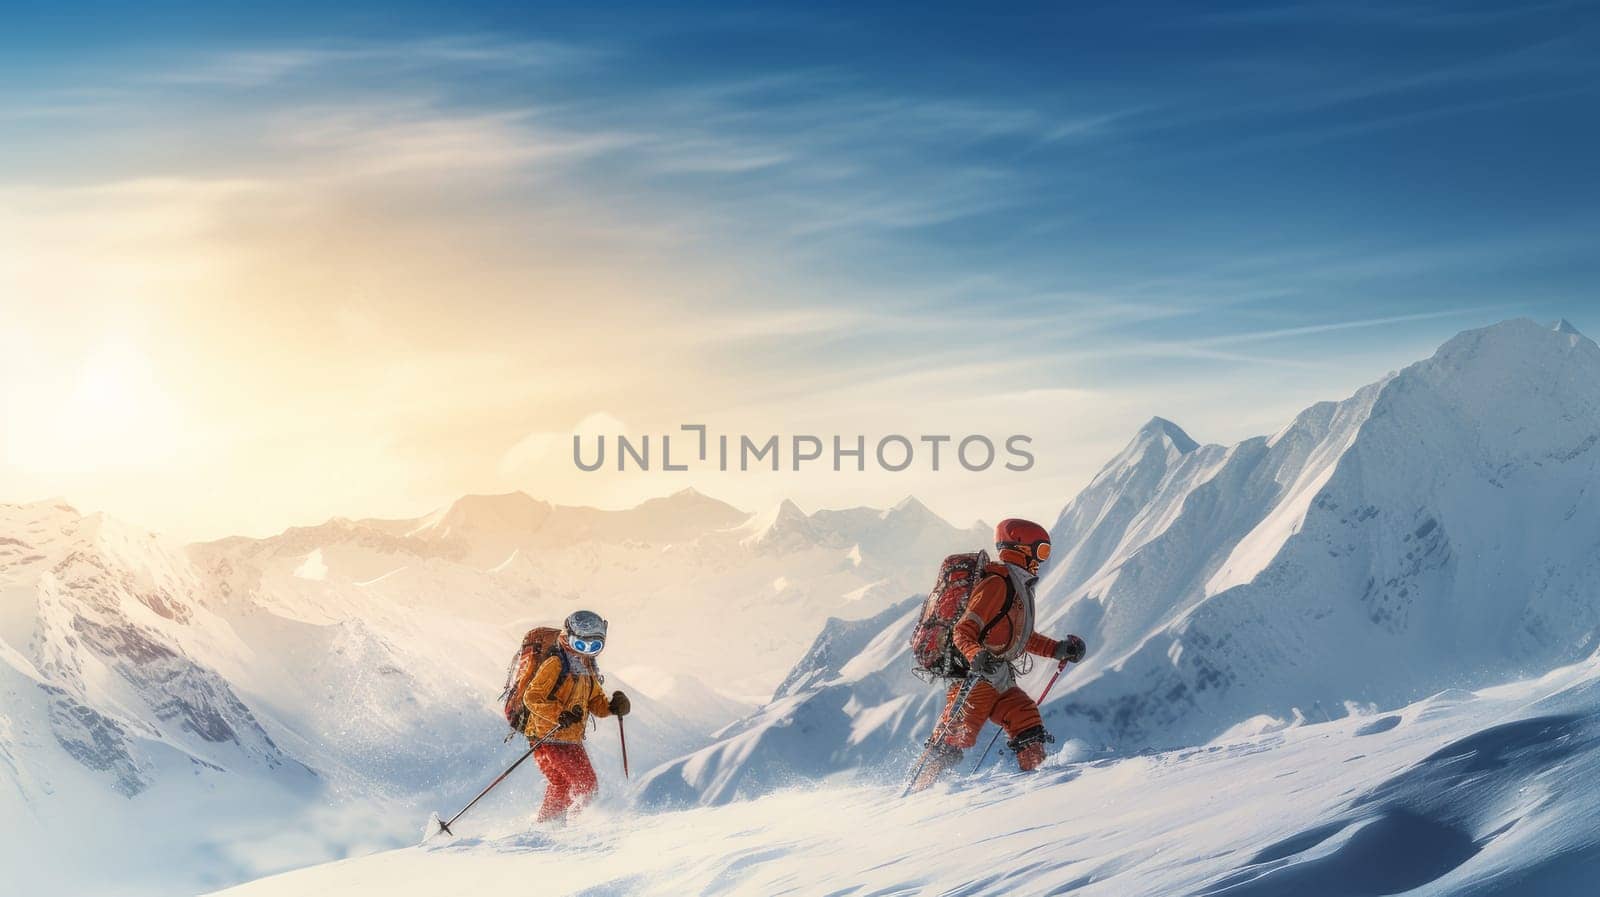 Happy and cheerful children skiing on snowy mountains with beautiful scenery at a ski resort, during vacation and winter holidays. Concept of traveling around the world, recreation, winter sports vacations, tourism in the mountains and unusual places